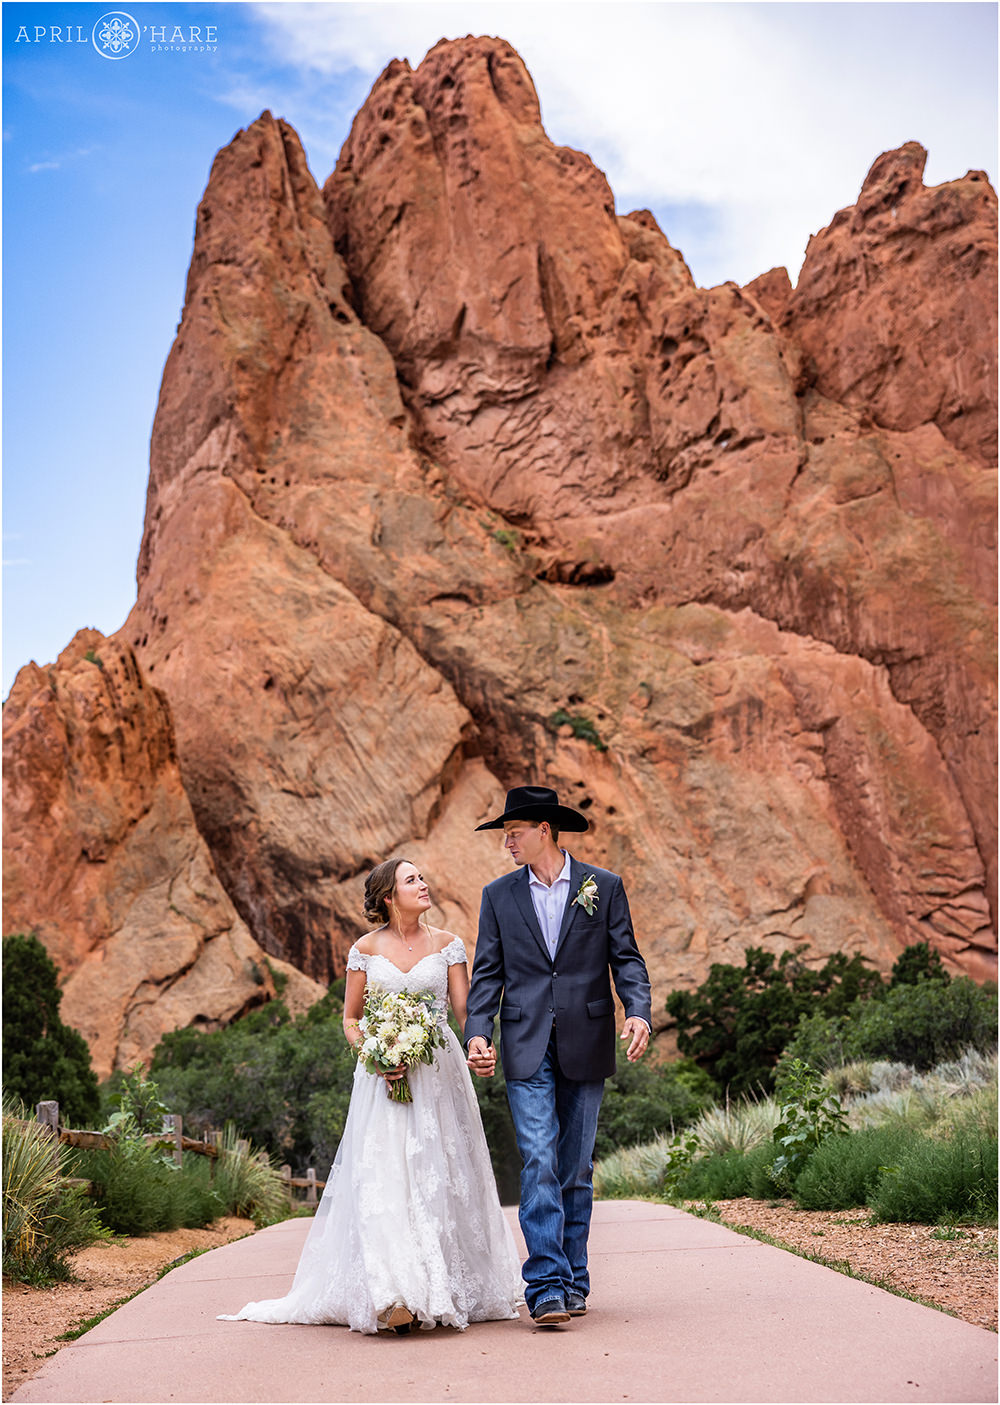 Bride and groom walk hand in hand on the main sidewalk at Garden of the Gods in Colorado Springs